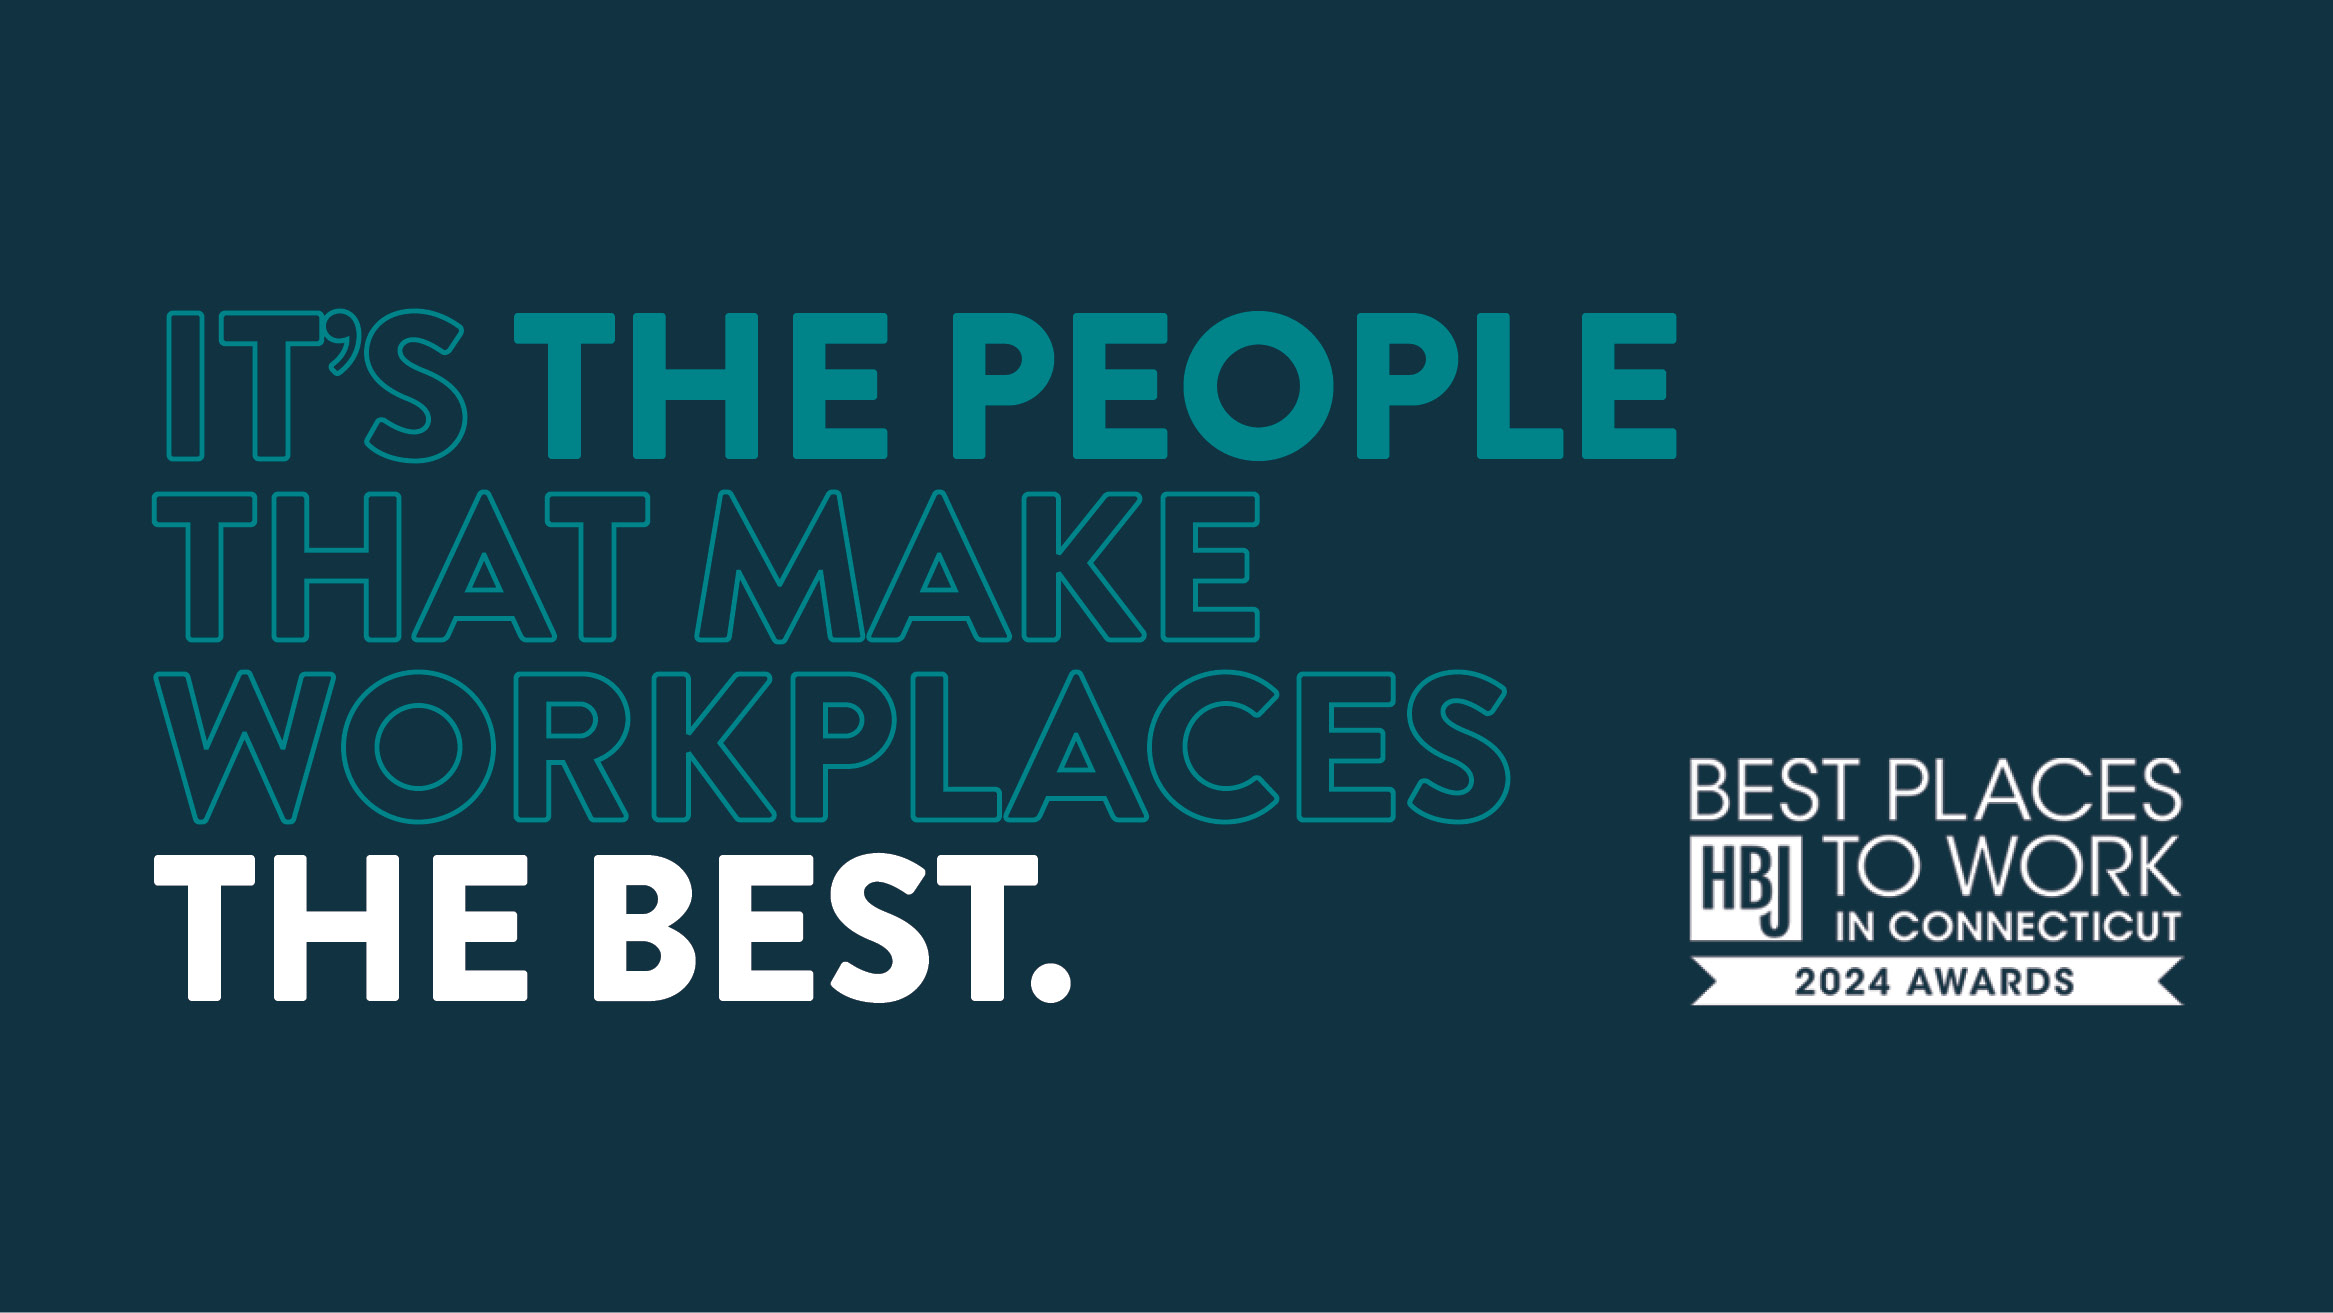 HBJ Best Places to Work logo with text that reads It's the people that make workplaces the best. 